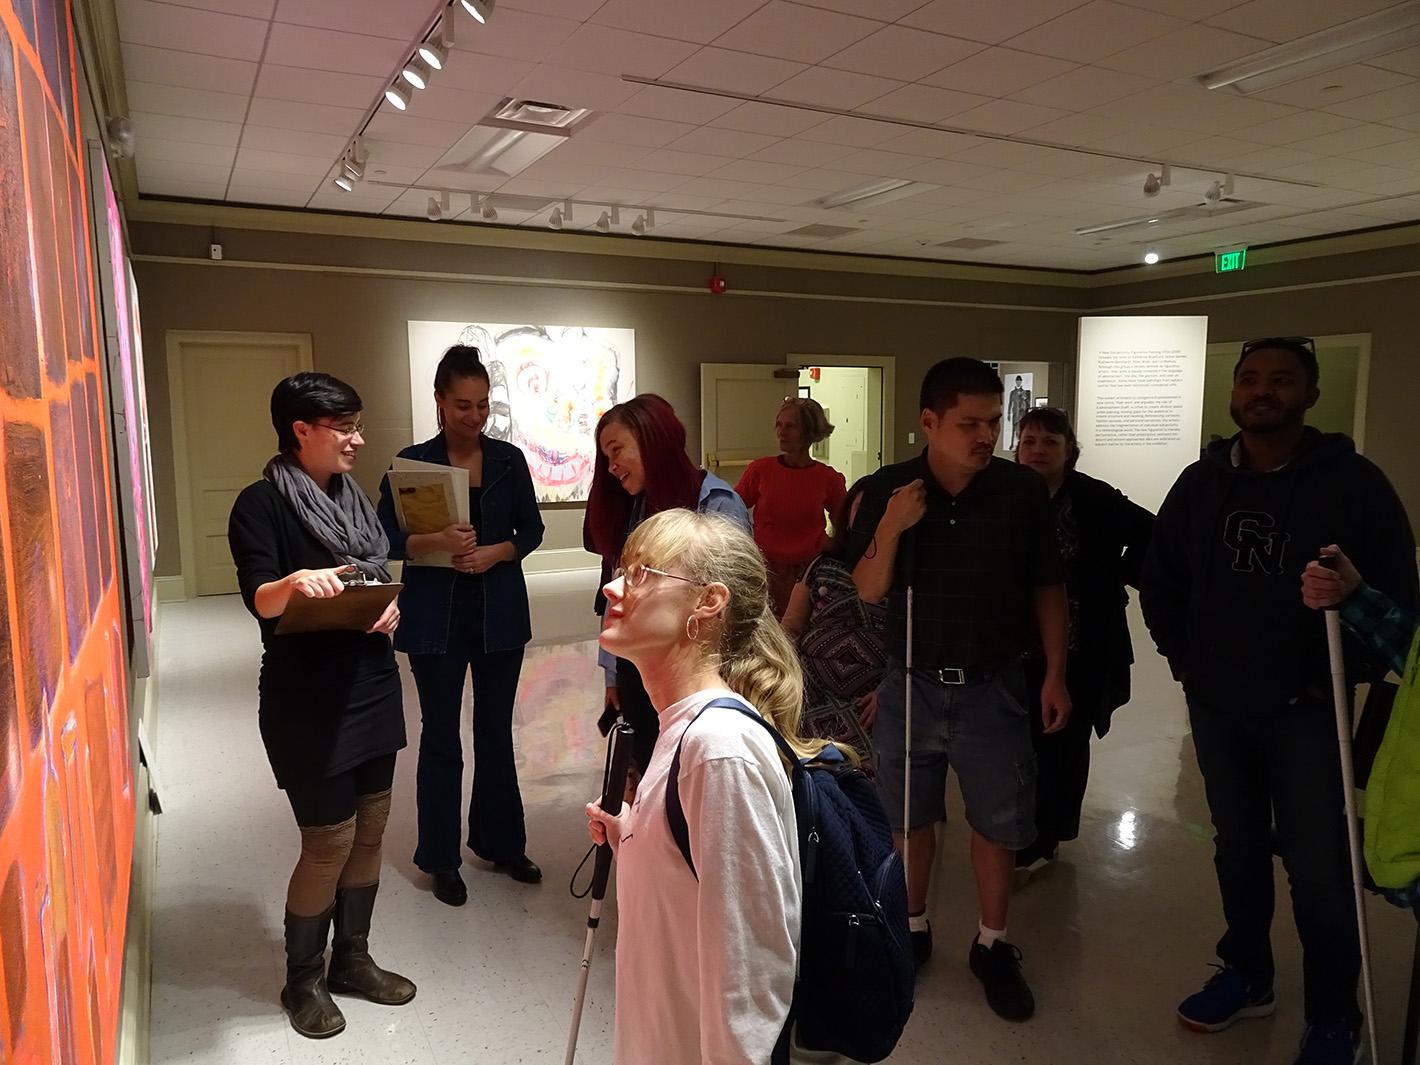 Members of the low visual and blind community take part in a tour specifically designed for them. Using works in the 2017 traveling exhibition A New Subjectivity: Figurative Painting After 2000, the Reece developed scripts, texture boards and composition boards to make the artwork more accessible to those with low or no vision at all. 